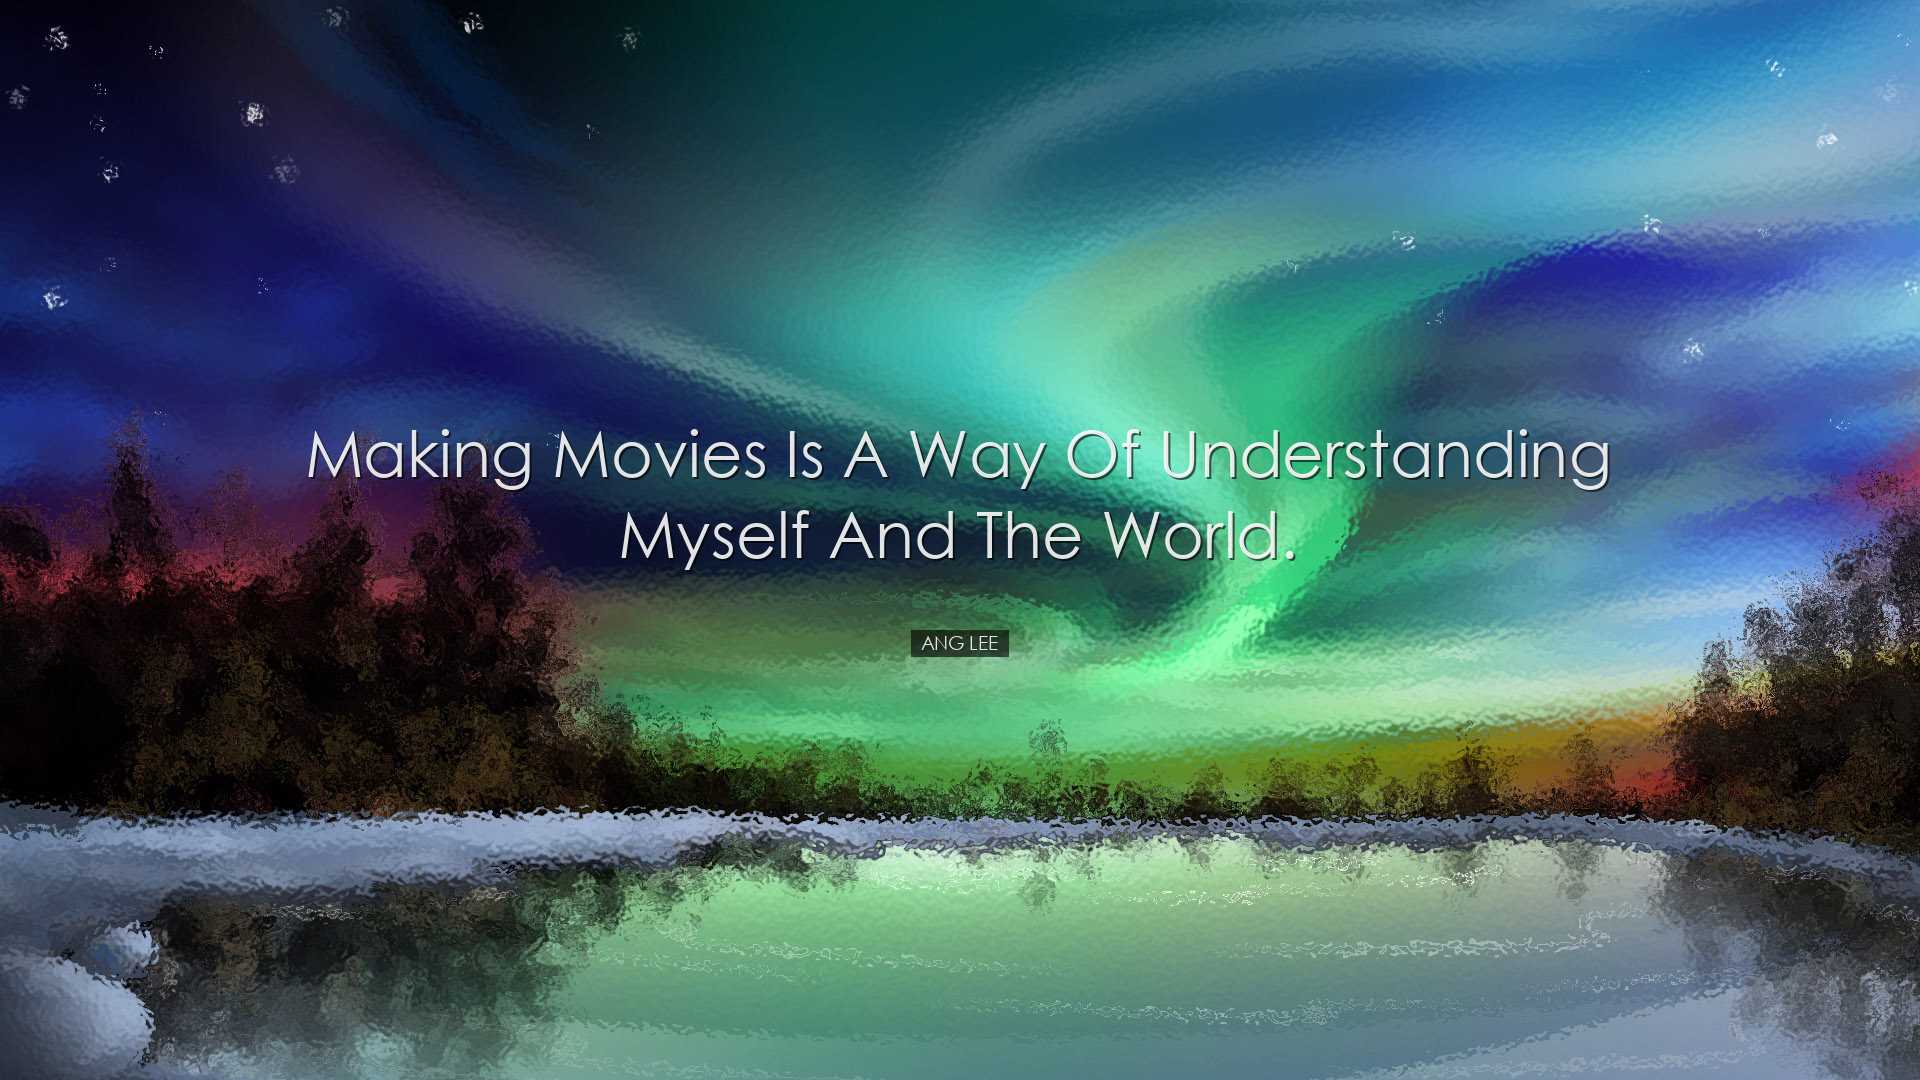 Making movies is a way of understanding myself and the world. - An